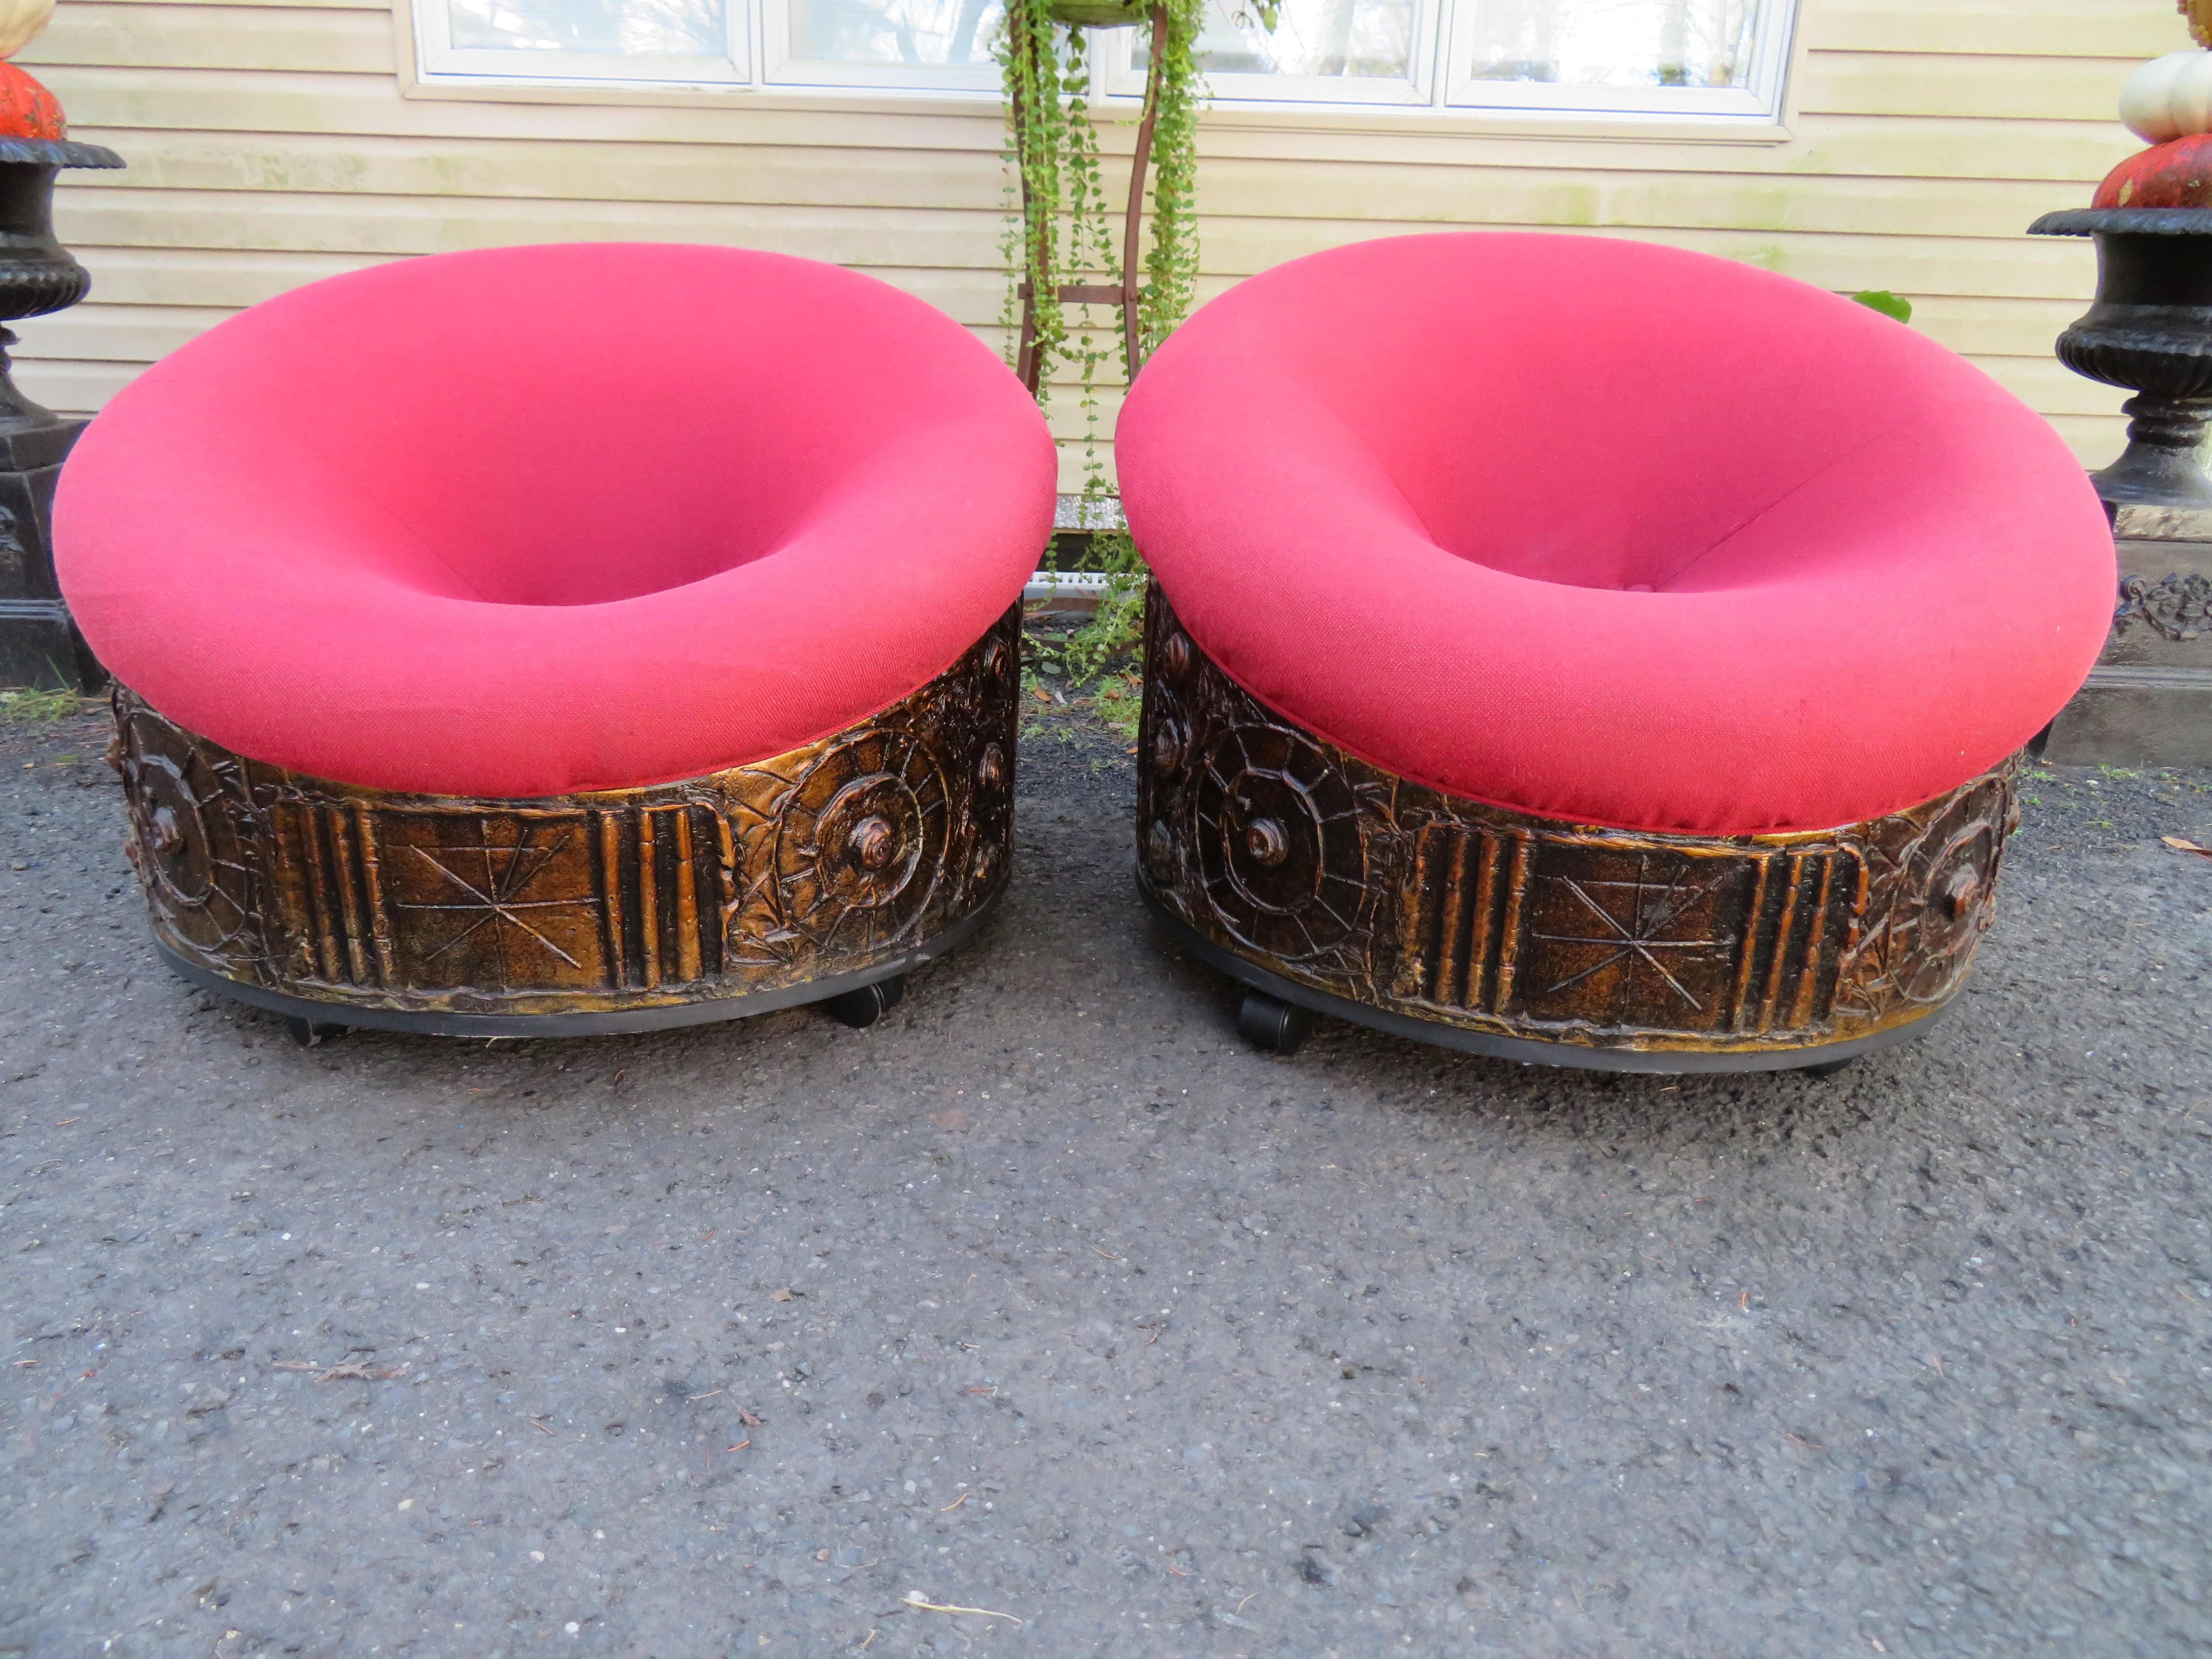 Magnificent Adrian Pearsall Brutalist Pod Lounge Chairs Mid-Century Modern, Pair In Good Condition For Sale In Pemberton, NJ